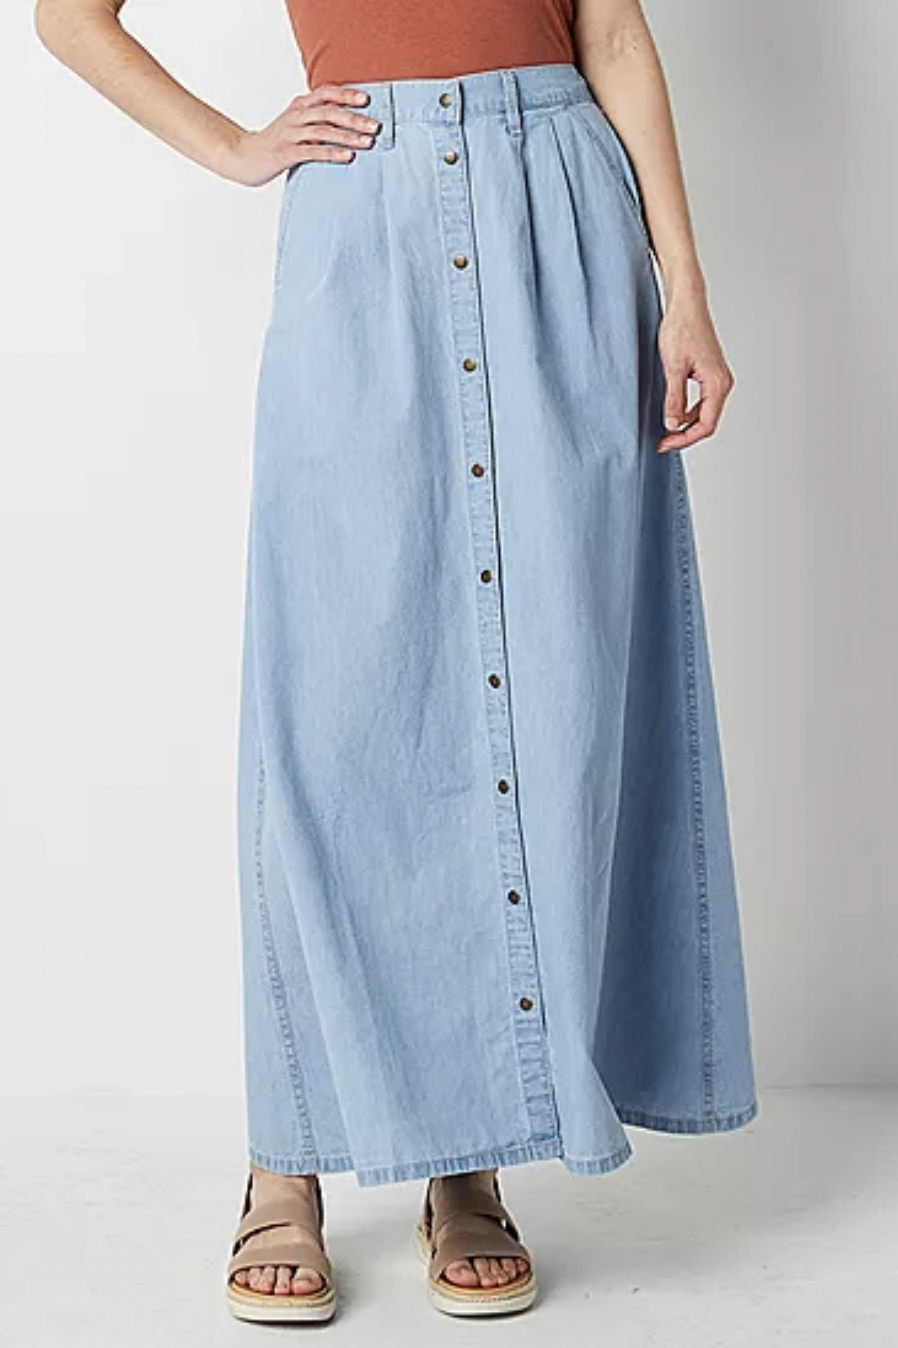 Stylish Maxi Skirt Outfits Start at Lulus  Affordable, On-Trend Women's Maxi  Skirts